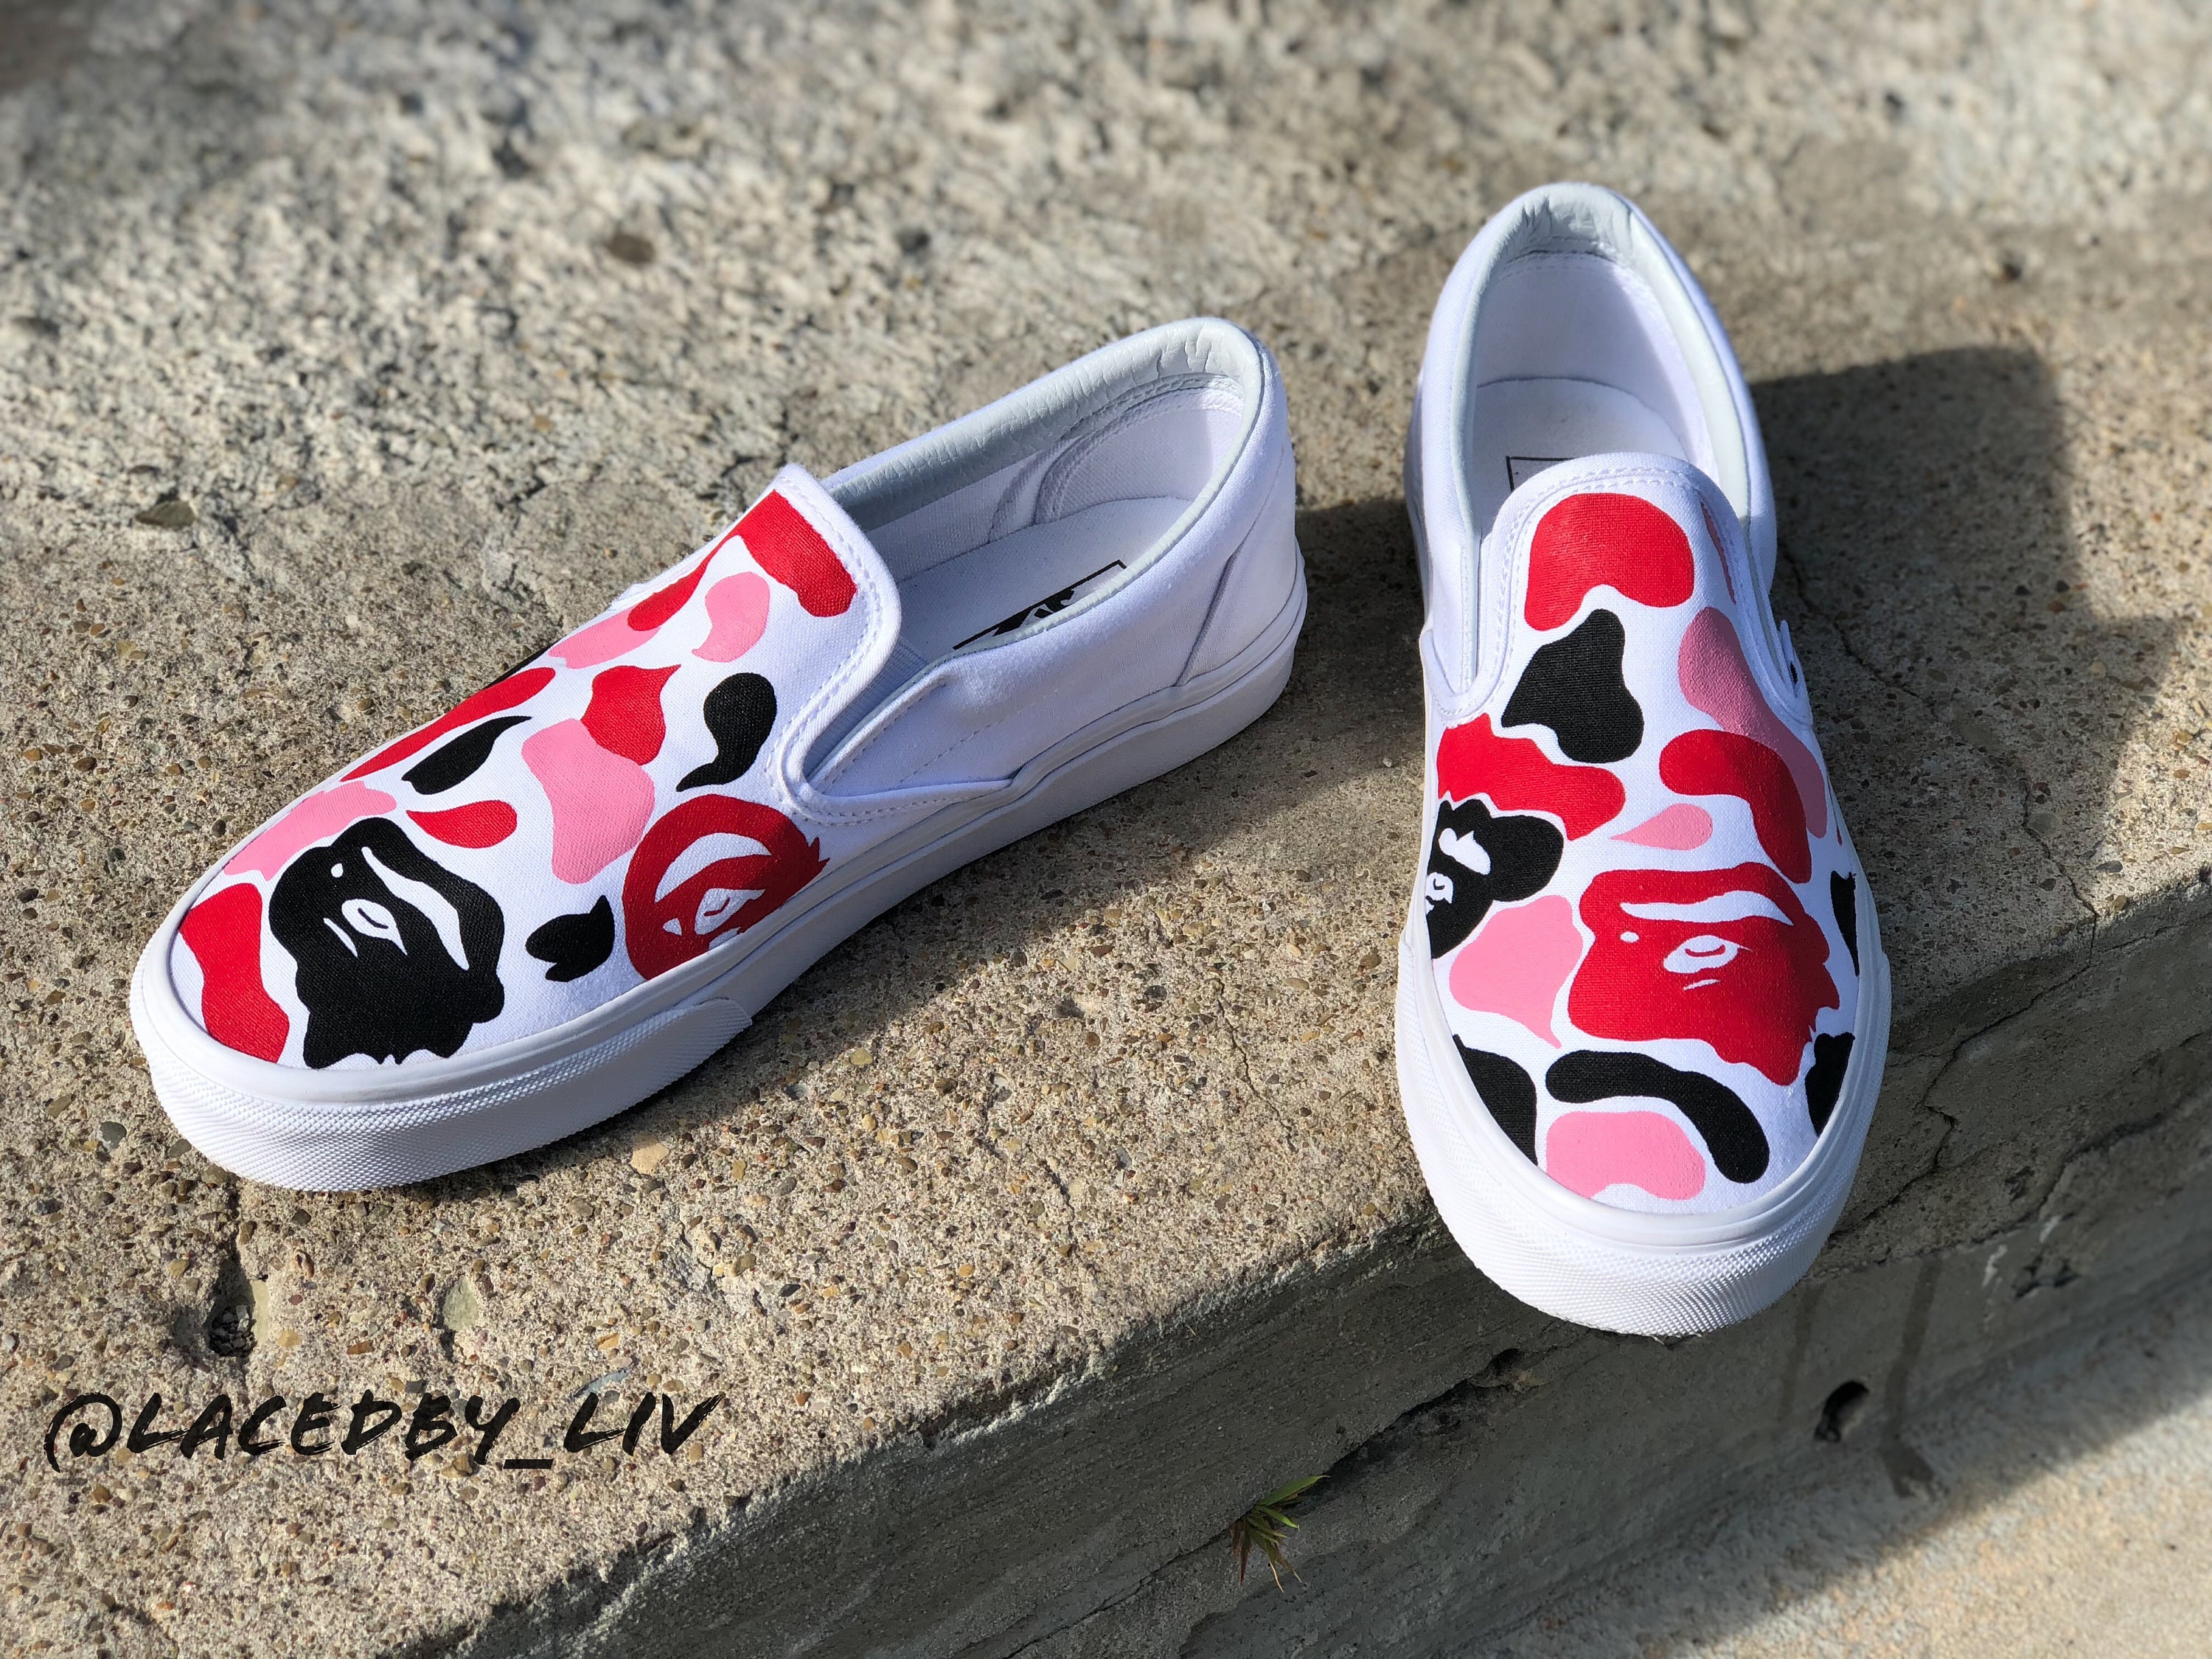 Farrell's Curious Soles - Custom Supreme X Bape Vans. Such a great project  to work on - airbrush work, hand painted details. Love the end result.  #bape #supreme #vans #curioussoles #customkicks #customsneakers #